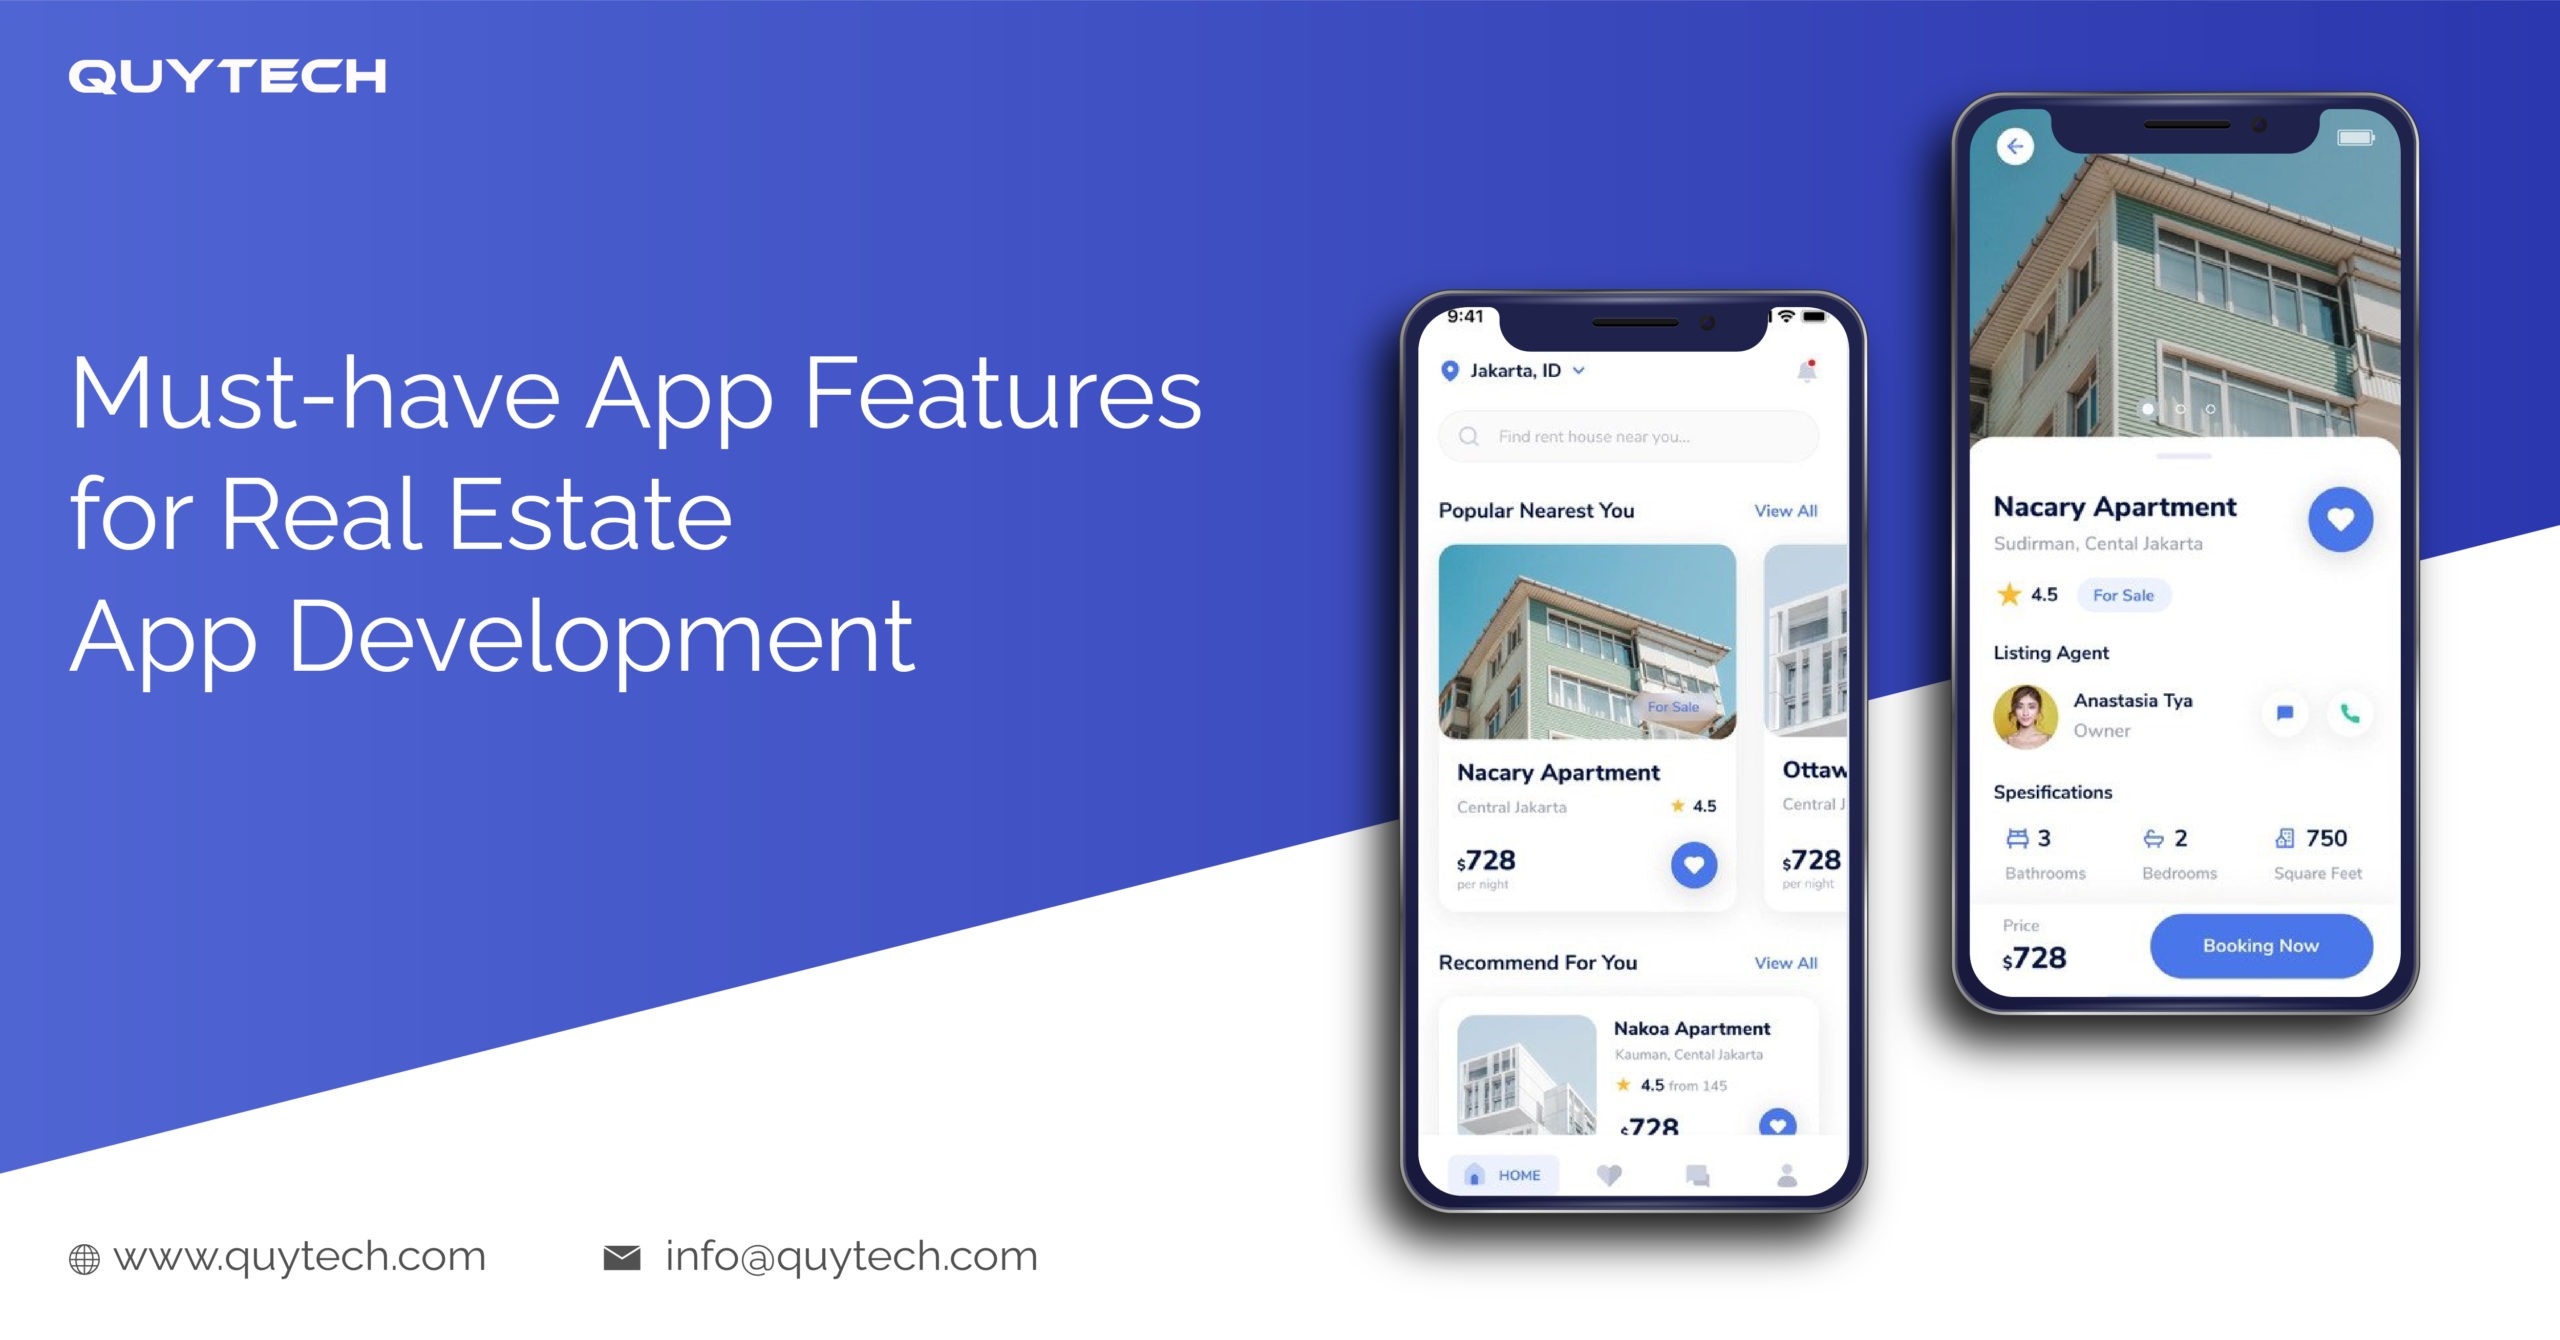 Must-have App Features for Real Estate App Development